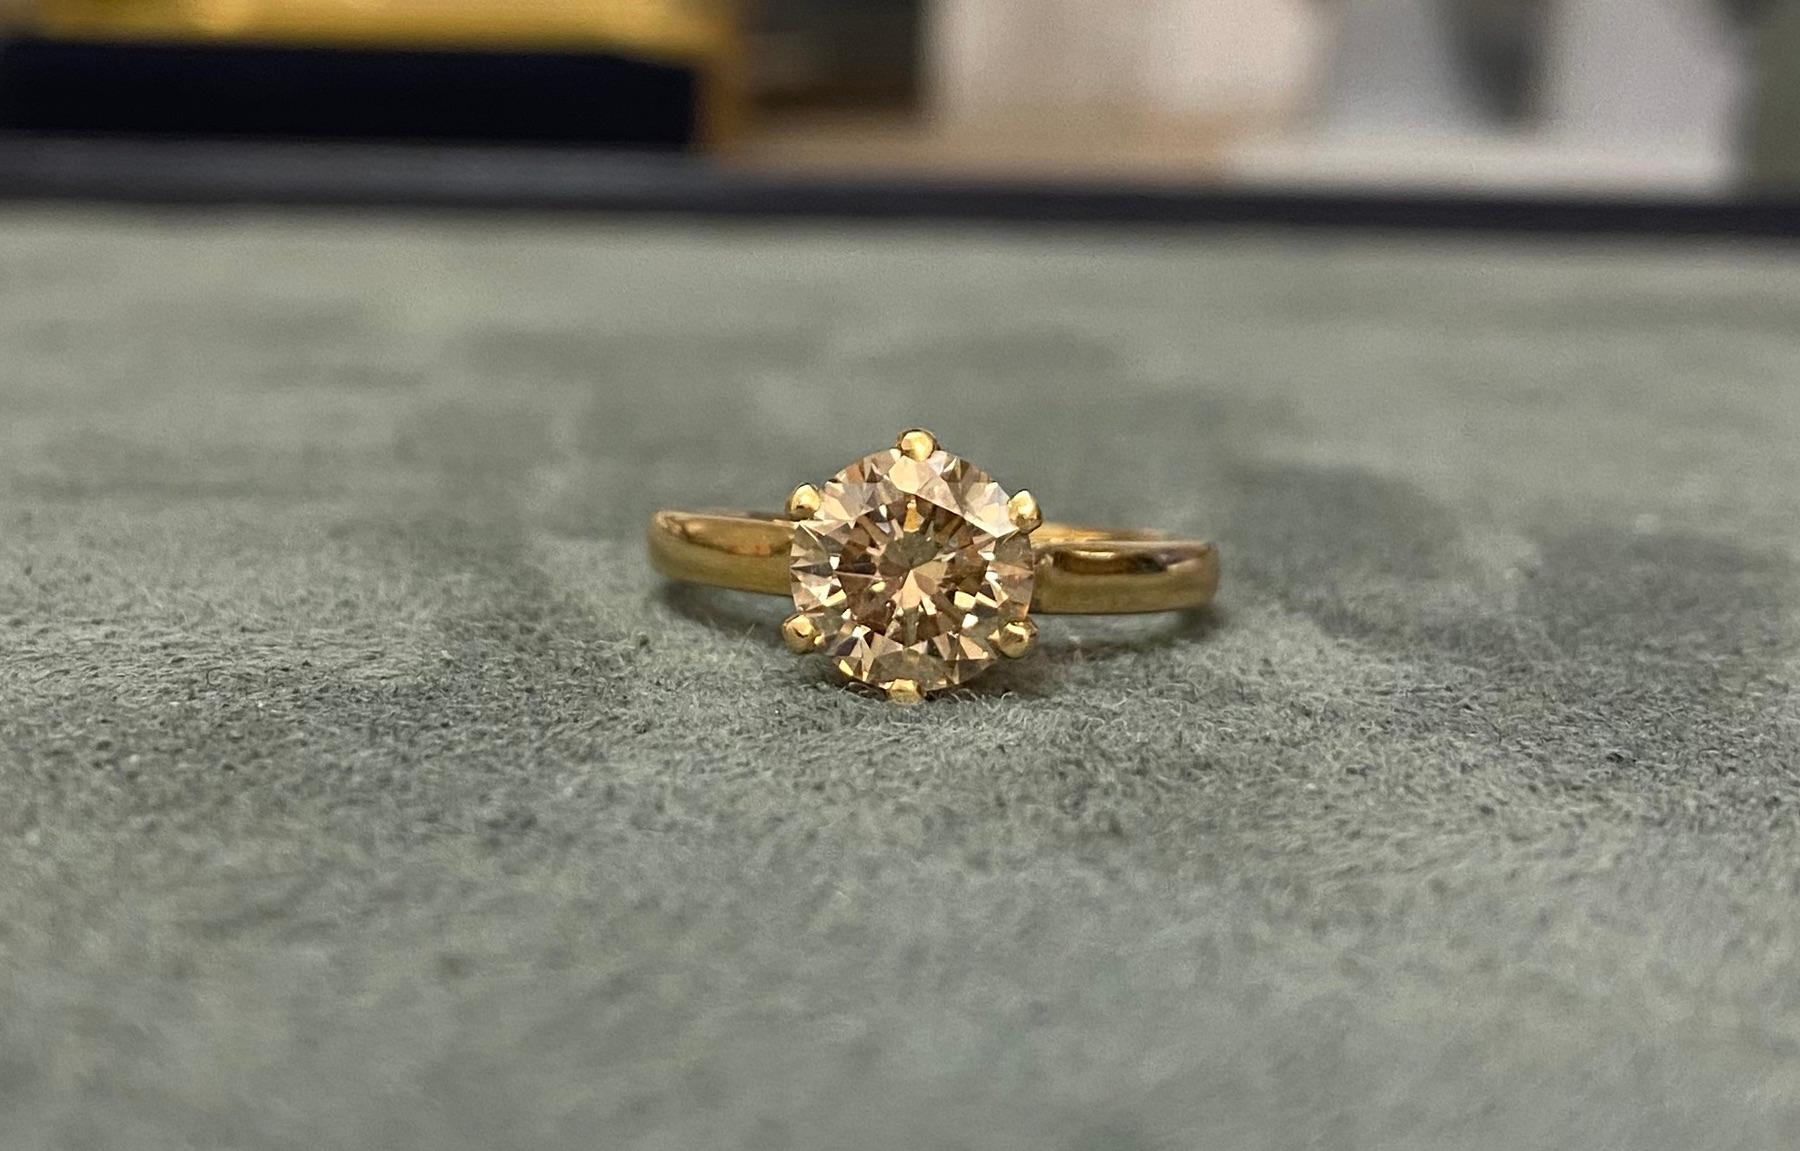 A 1.67ct light brown diamond (SI1) set in 18k yellow gold. 